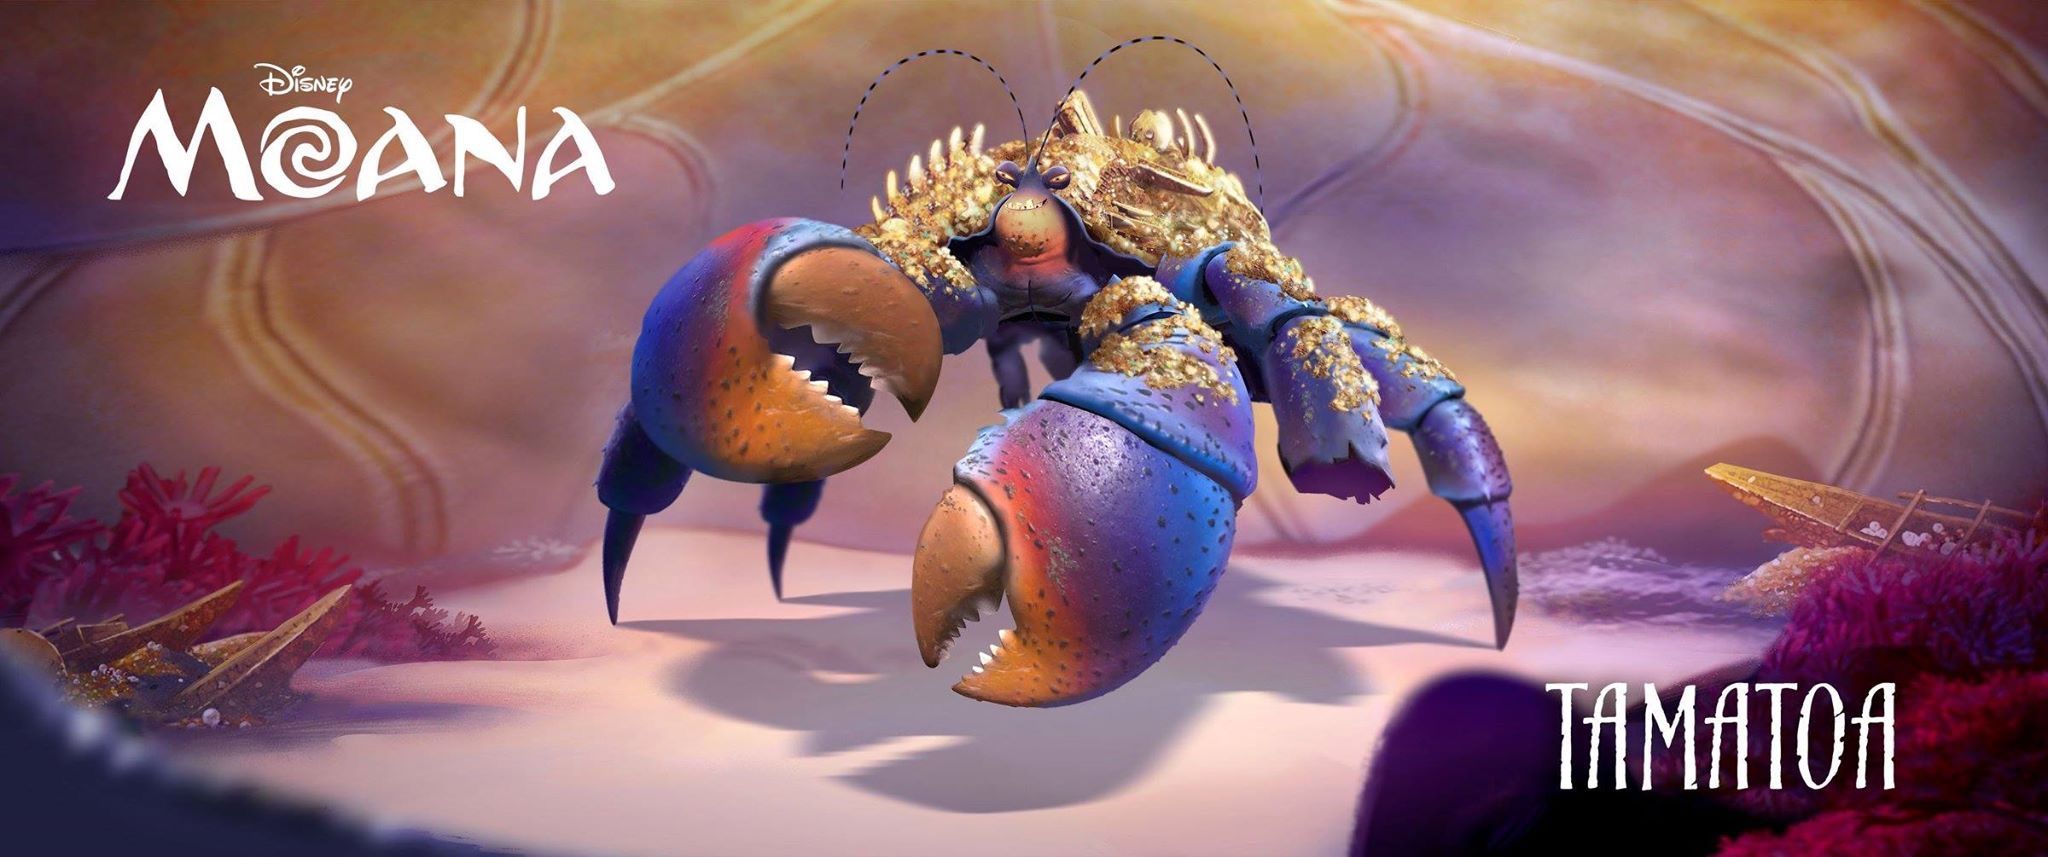 Tamatoa voiced by Jemaine Clement: 50-foot crab living in th